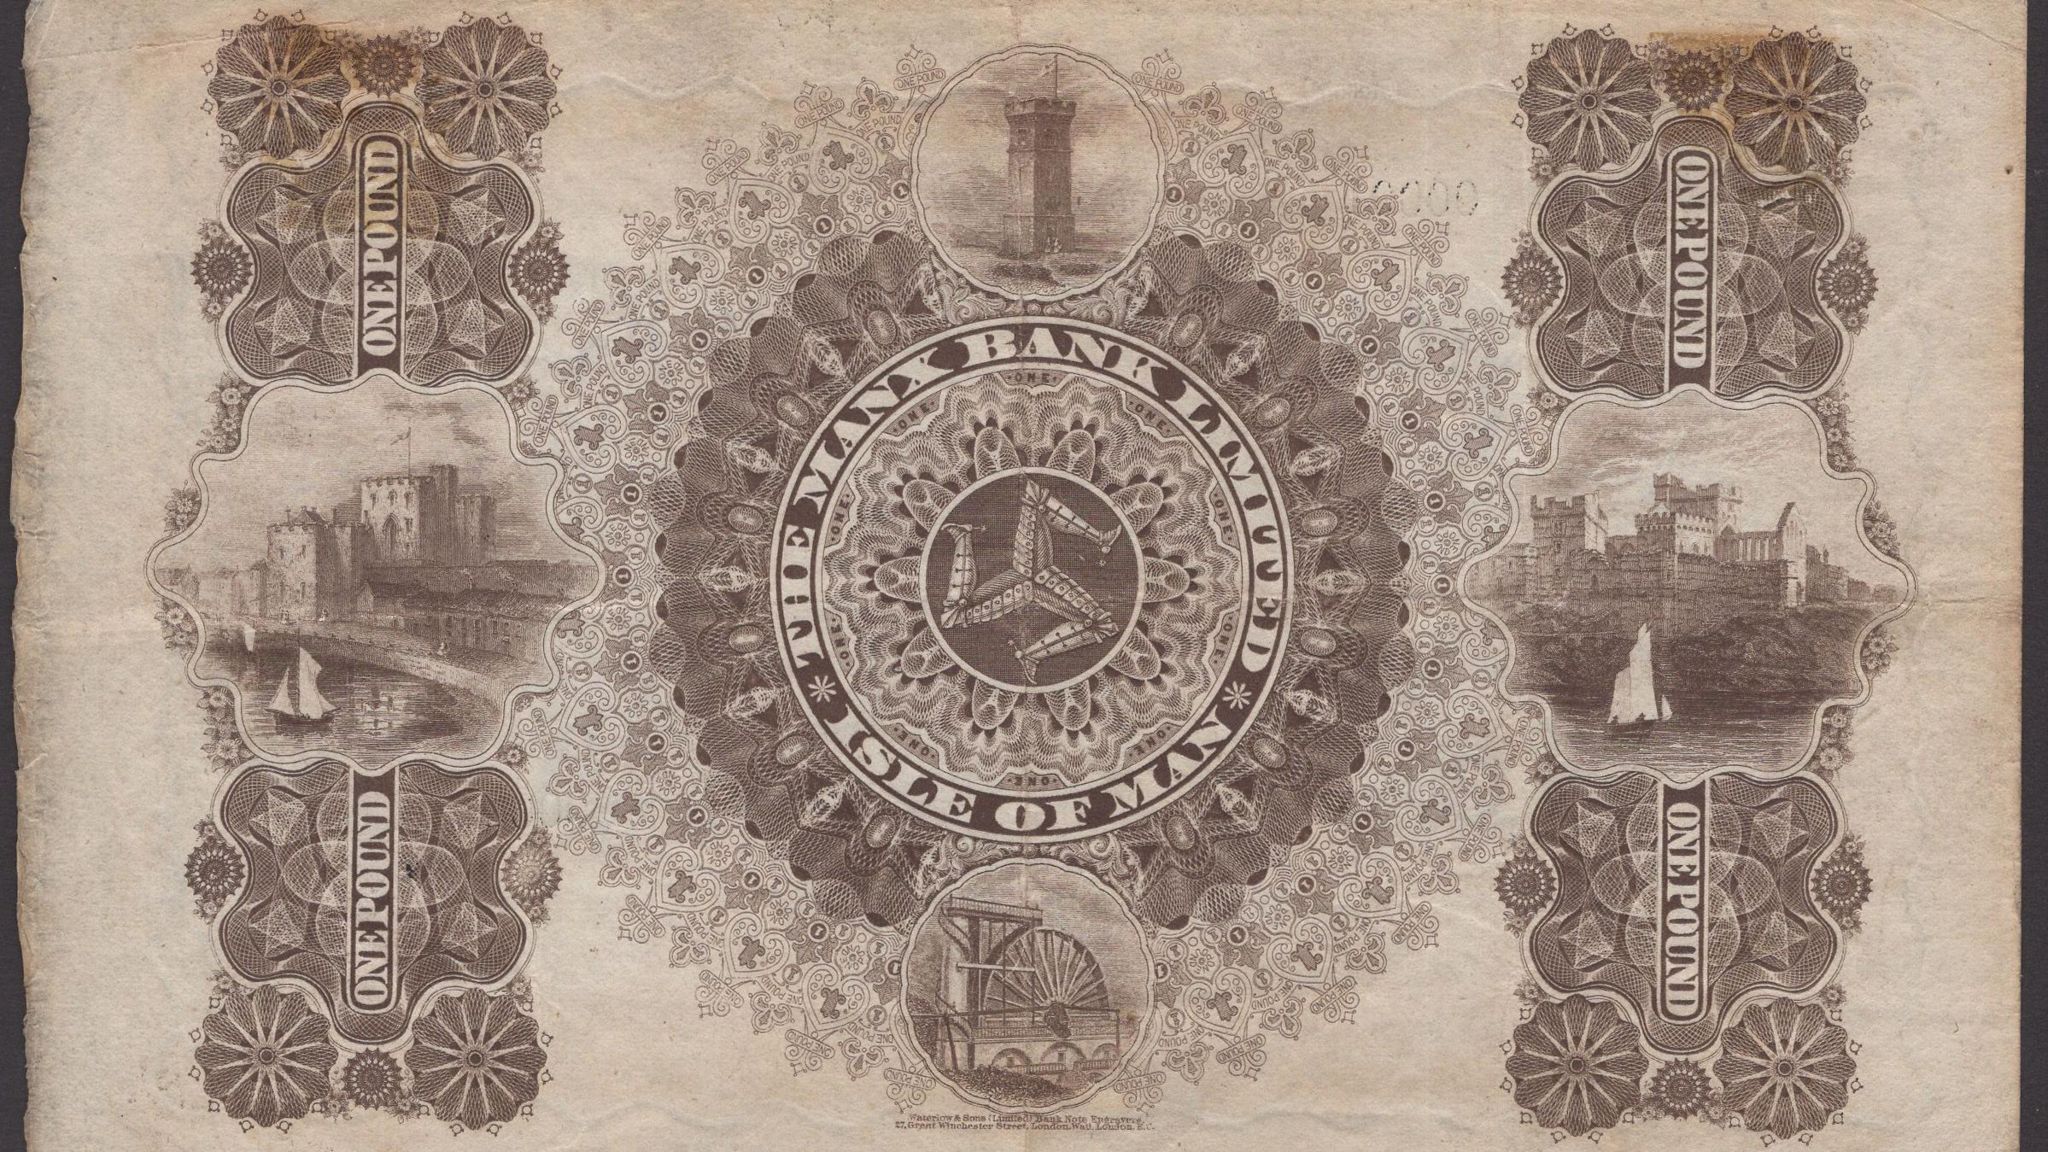 The reverse of the first Manx bank note to be issued